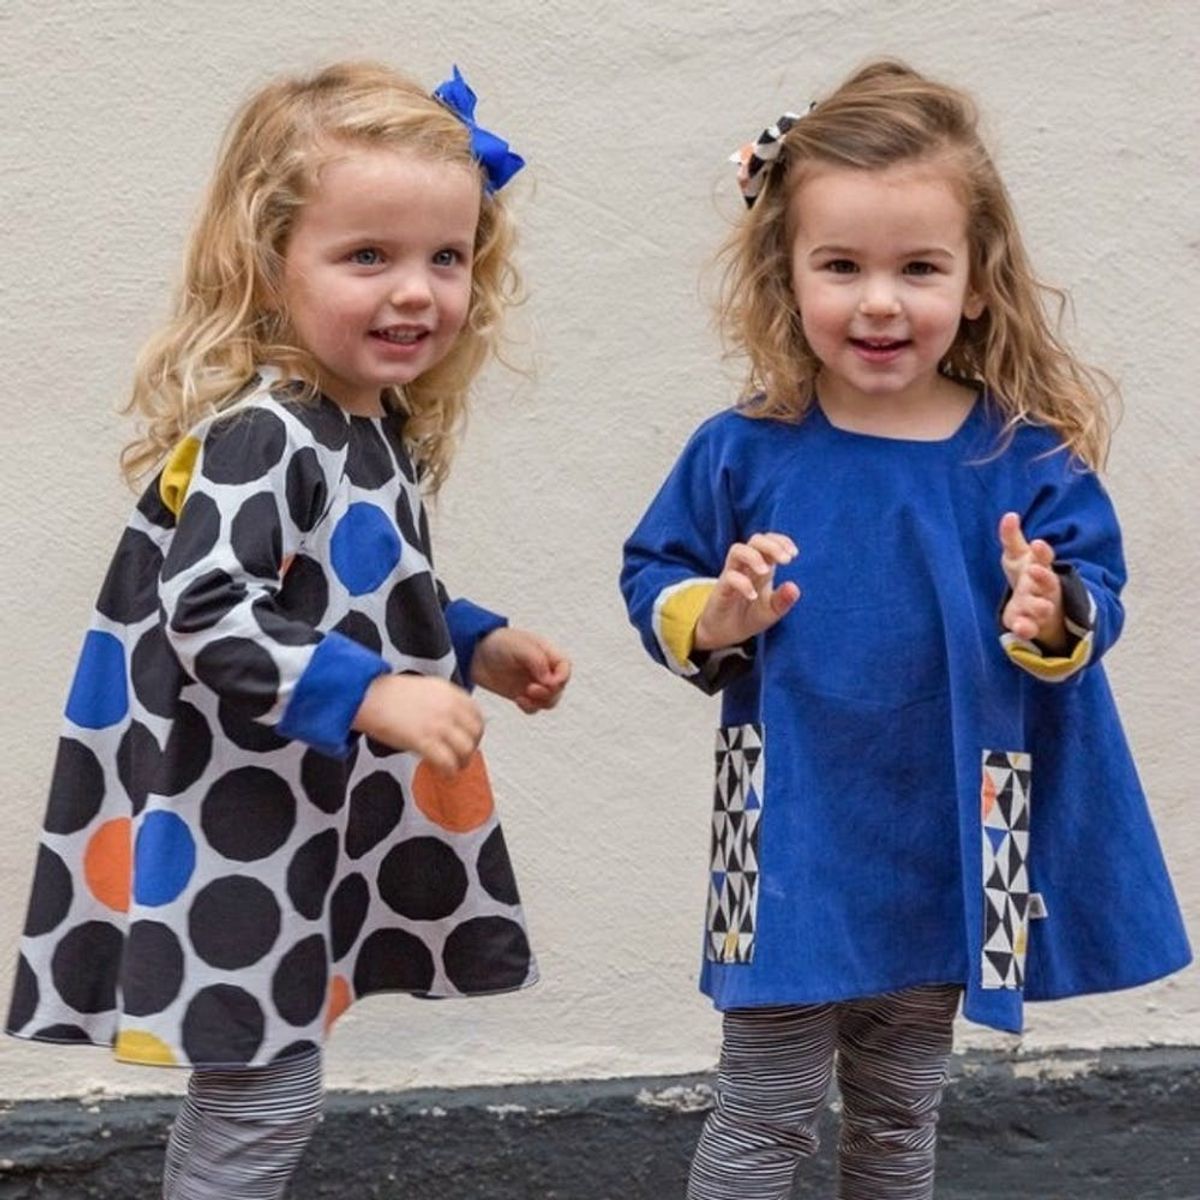 20 Cool-Kid Clothing Brands to Keep Your Baby Looking Stylish